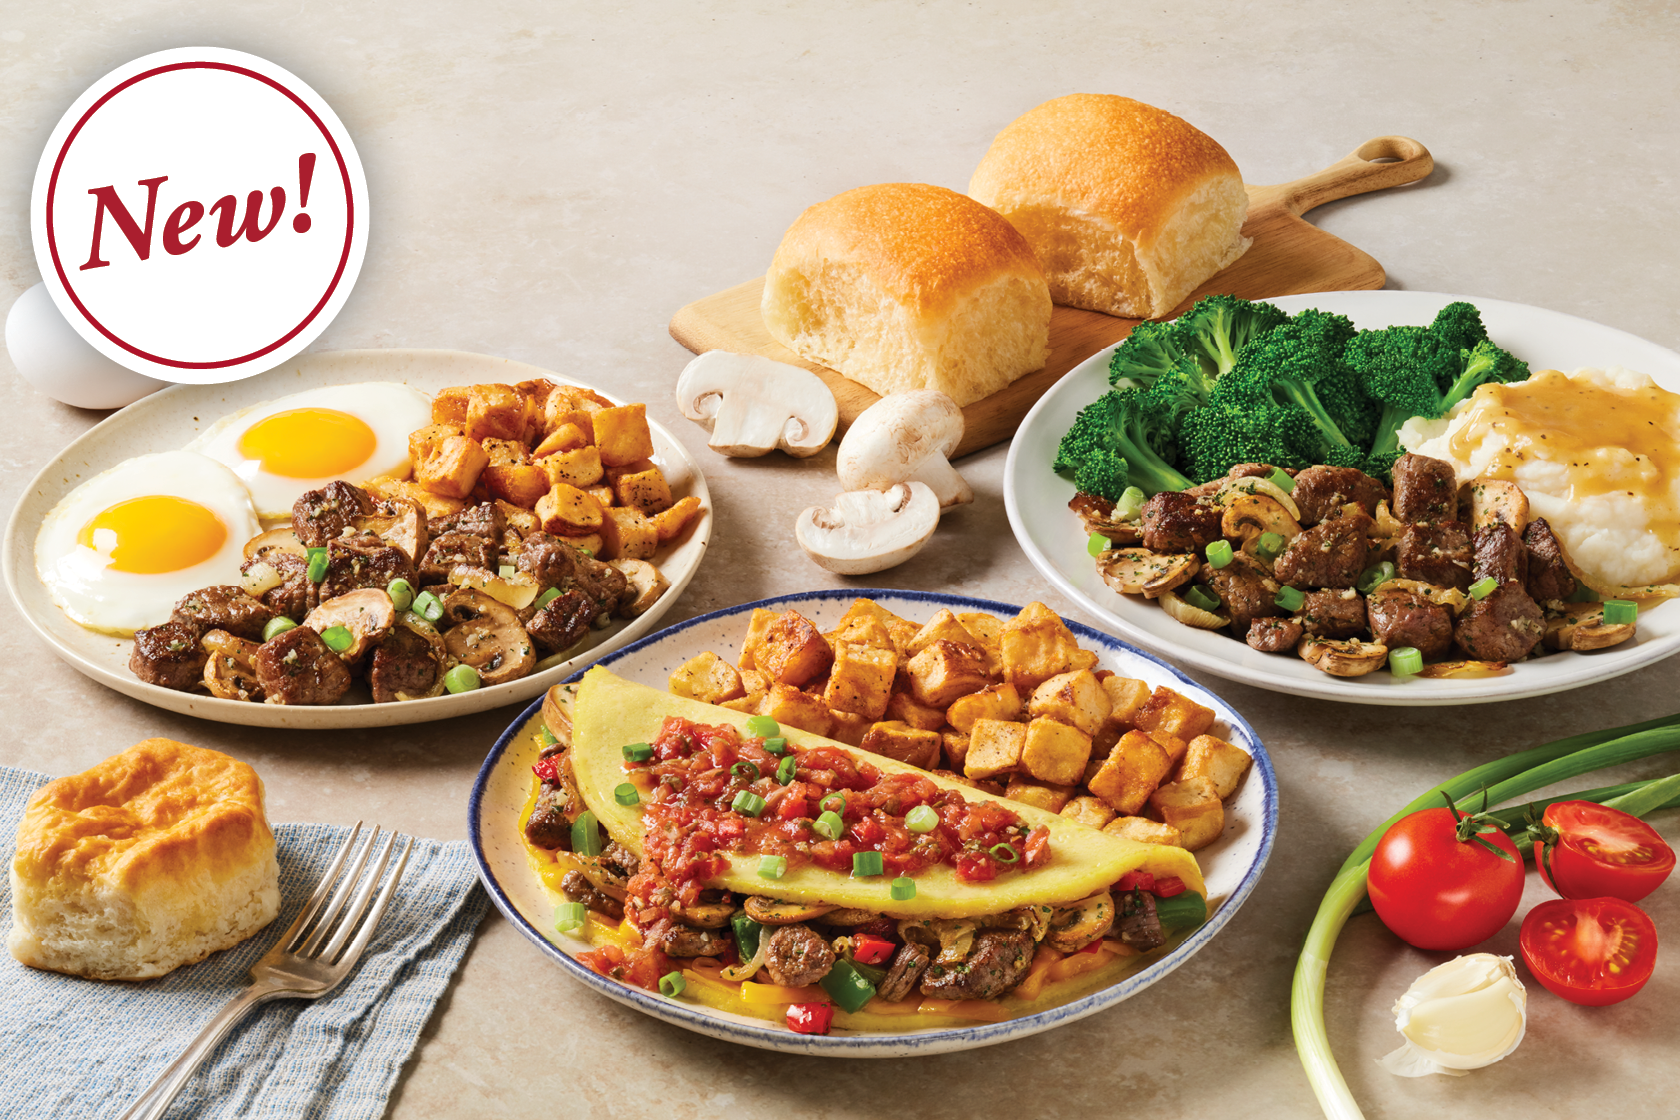 What Time Does Bob Evans Stop Serving Breakfast? Find Out Now!